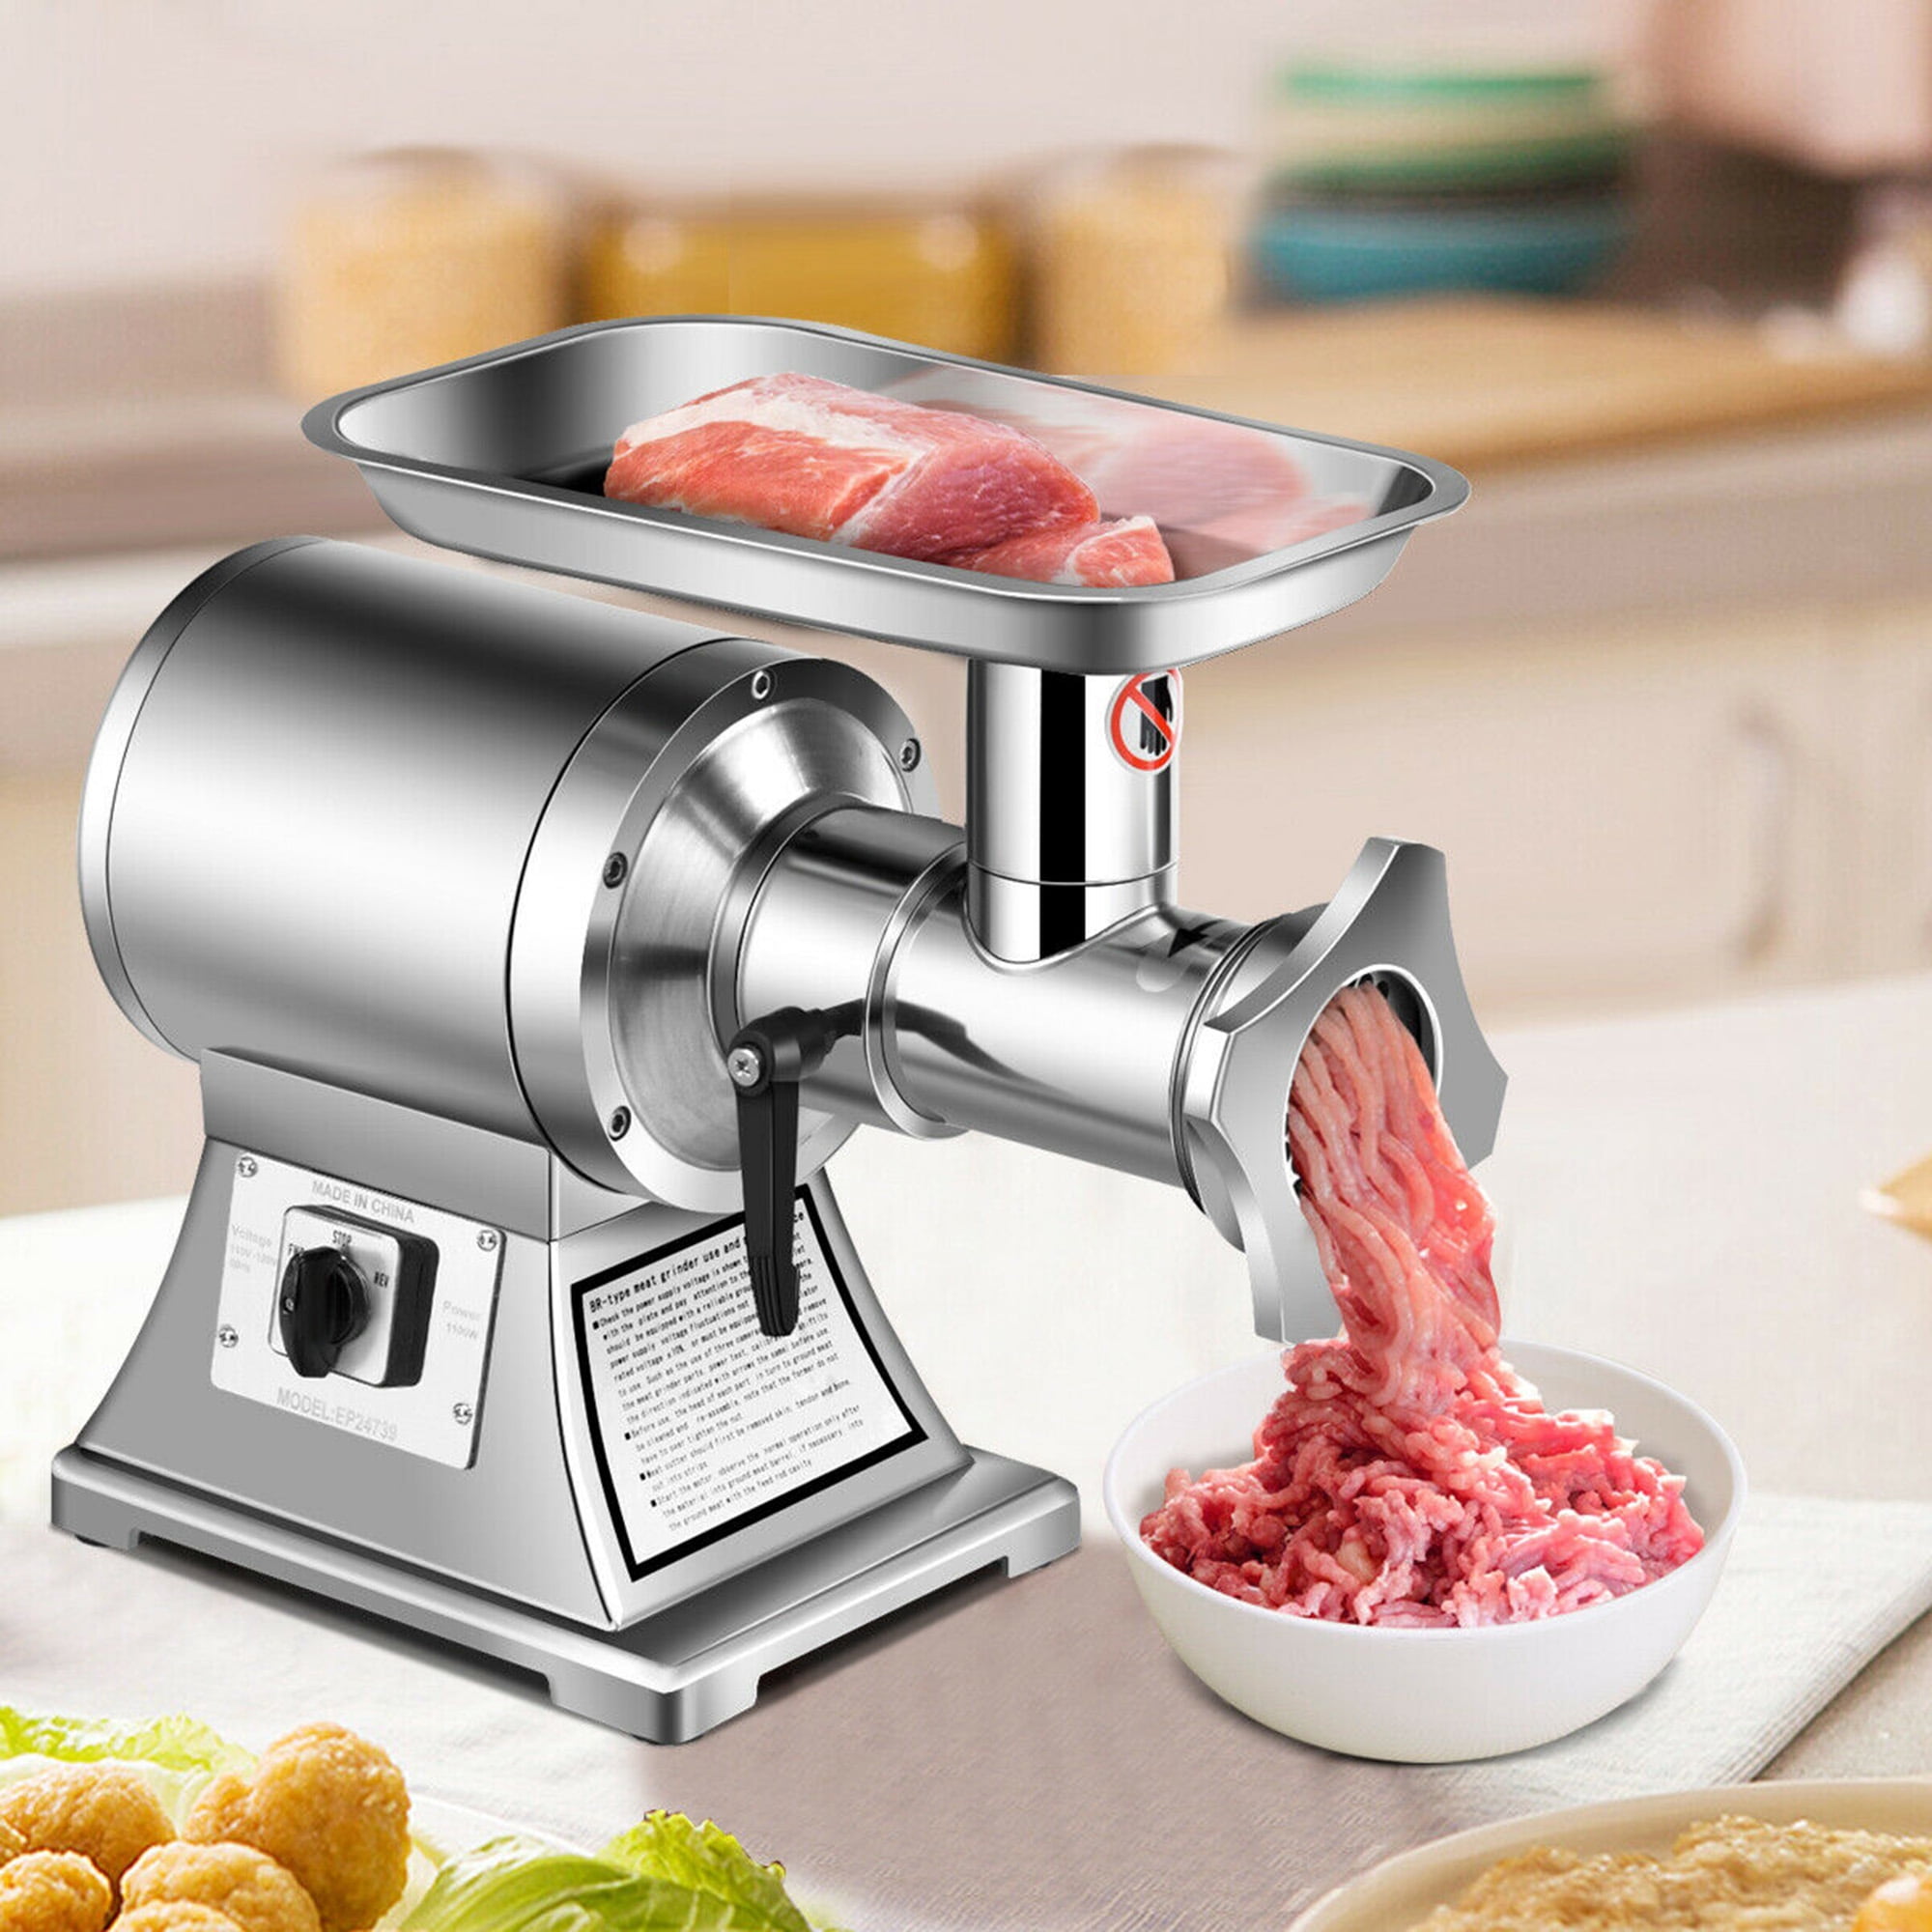 Heavy-duty R.G.V. MAXI VIP 12 G/S Electric Cheese Grater - Stainless Steel  Heavy-duty Drum - 1100W